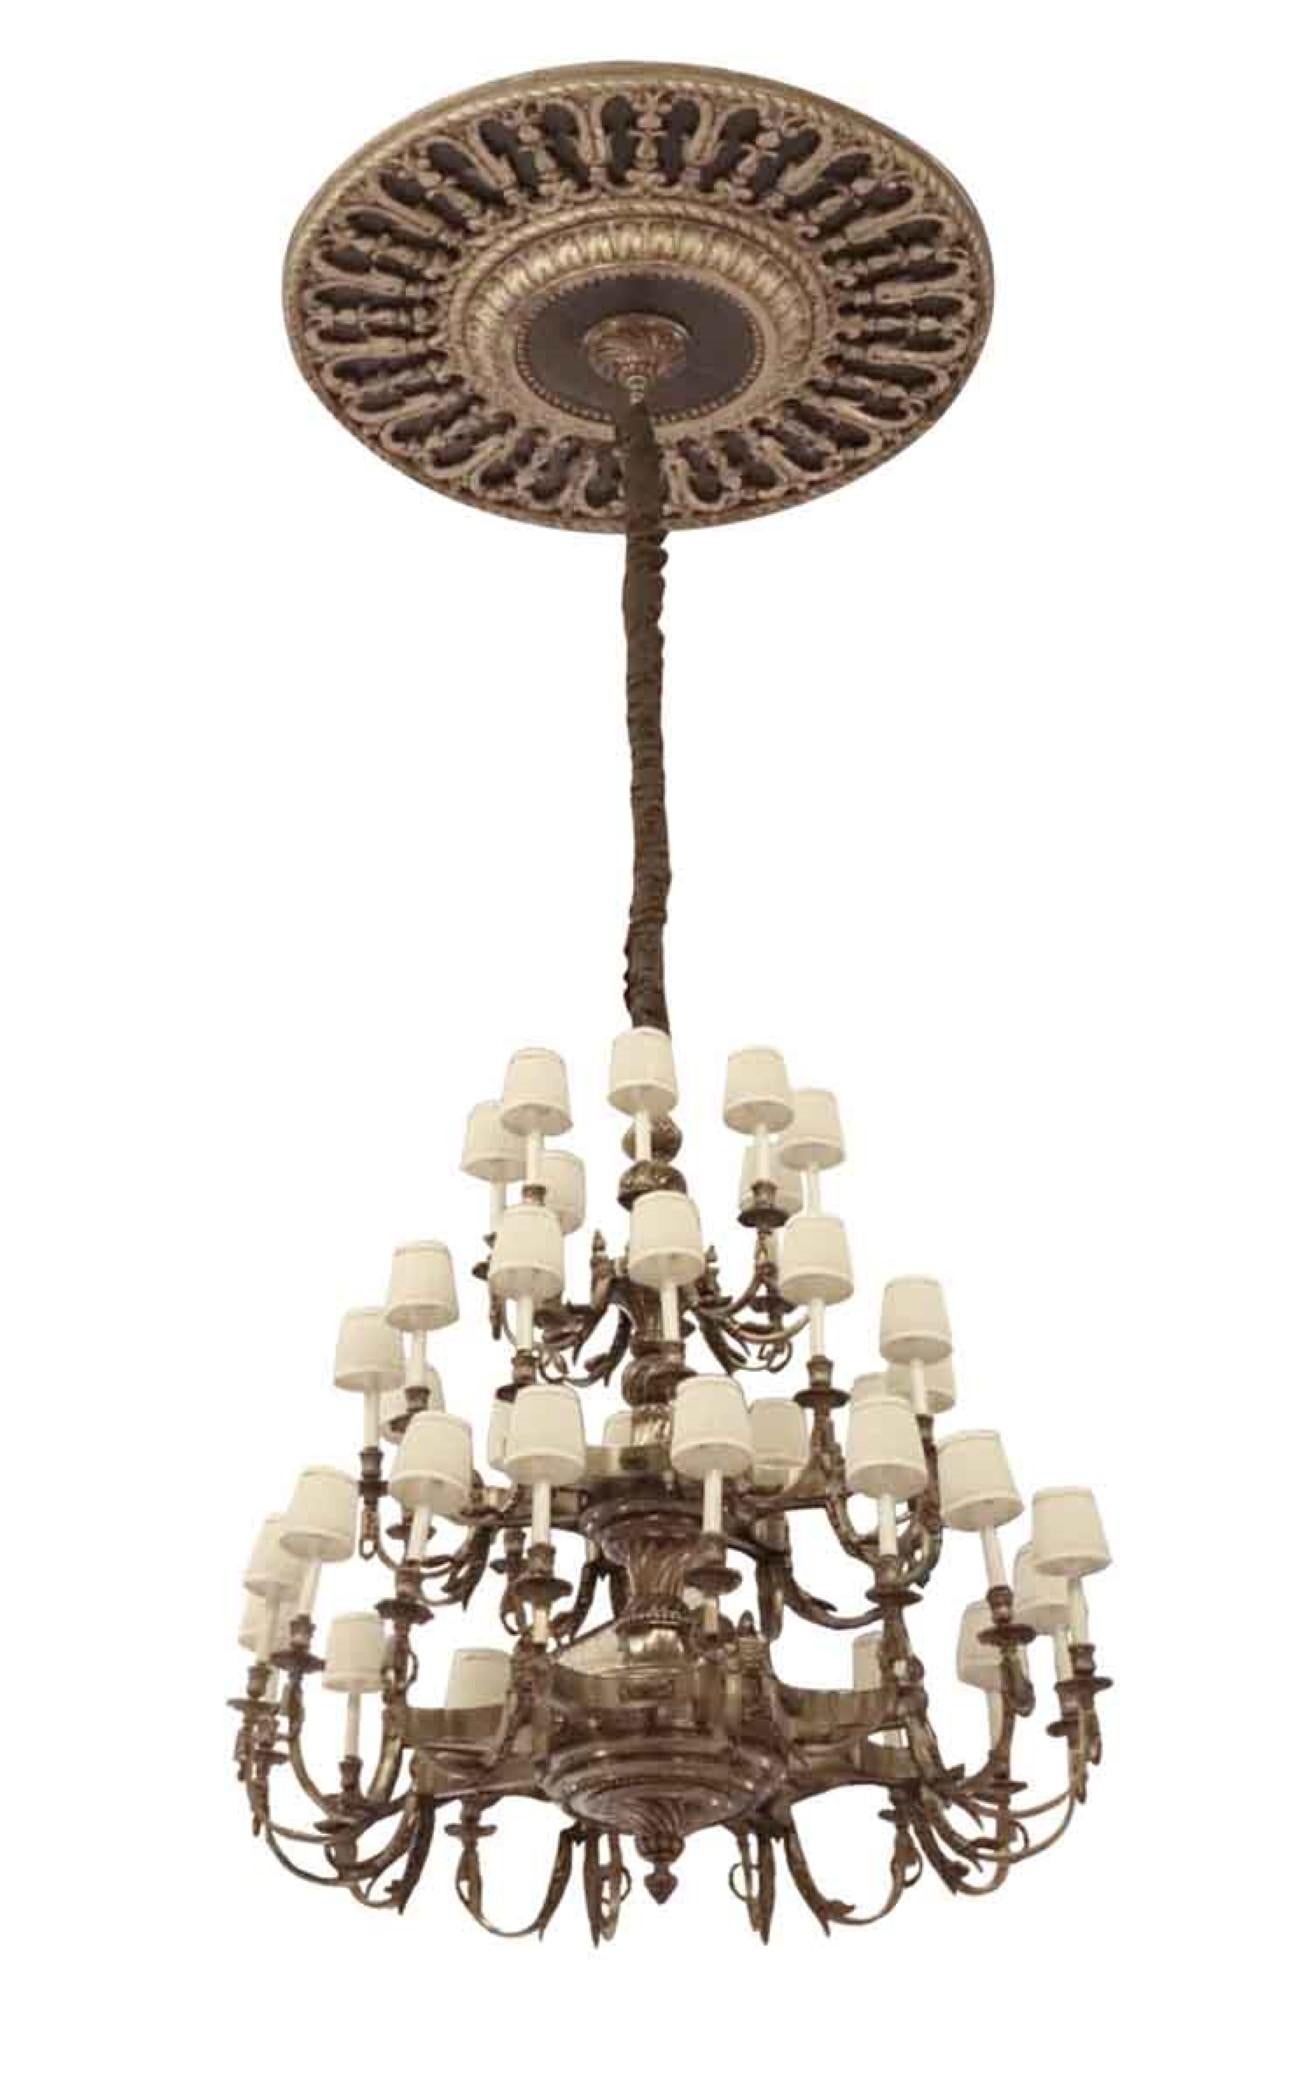 The bronze ceiling medallion not available as it was not retrieved. This 20th century grand scale chandelier originally graced the Conrad Suite in the Waldorf Astoria Hotel in NYC. This bronze chandelier has 36 lights and can be used with or without